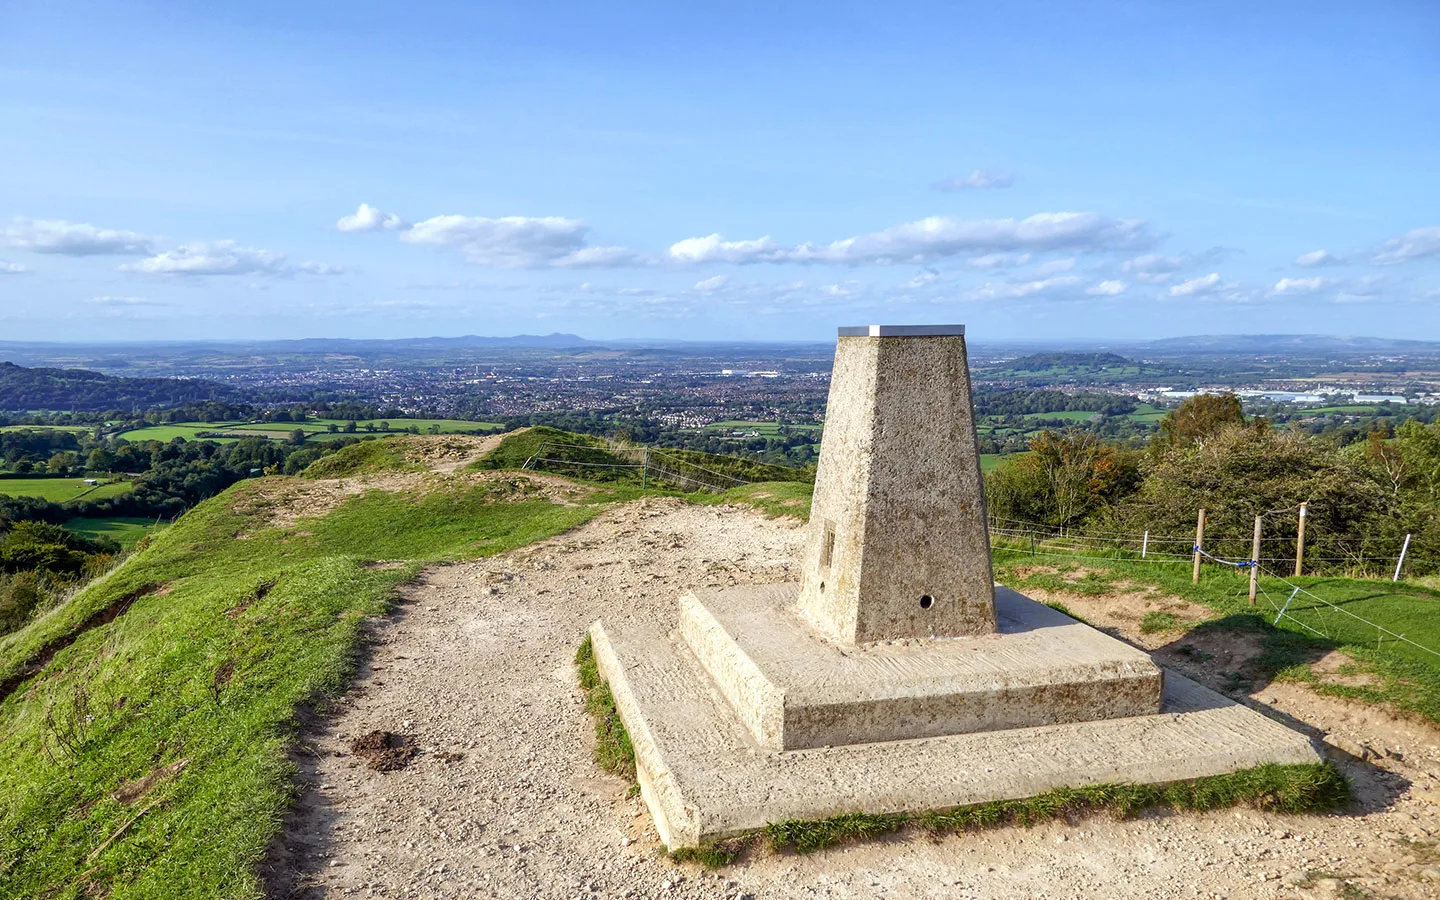 Views from Painswick Beacon in the Cotswolds